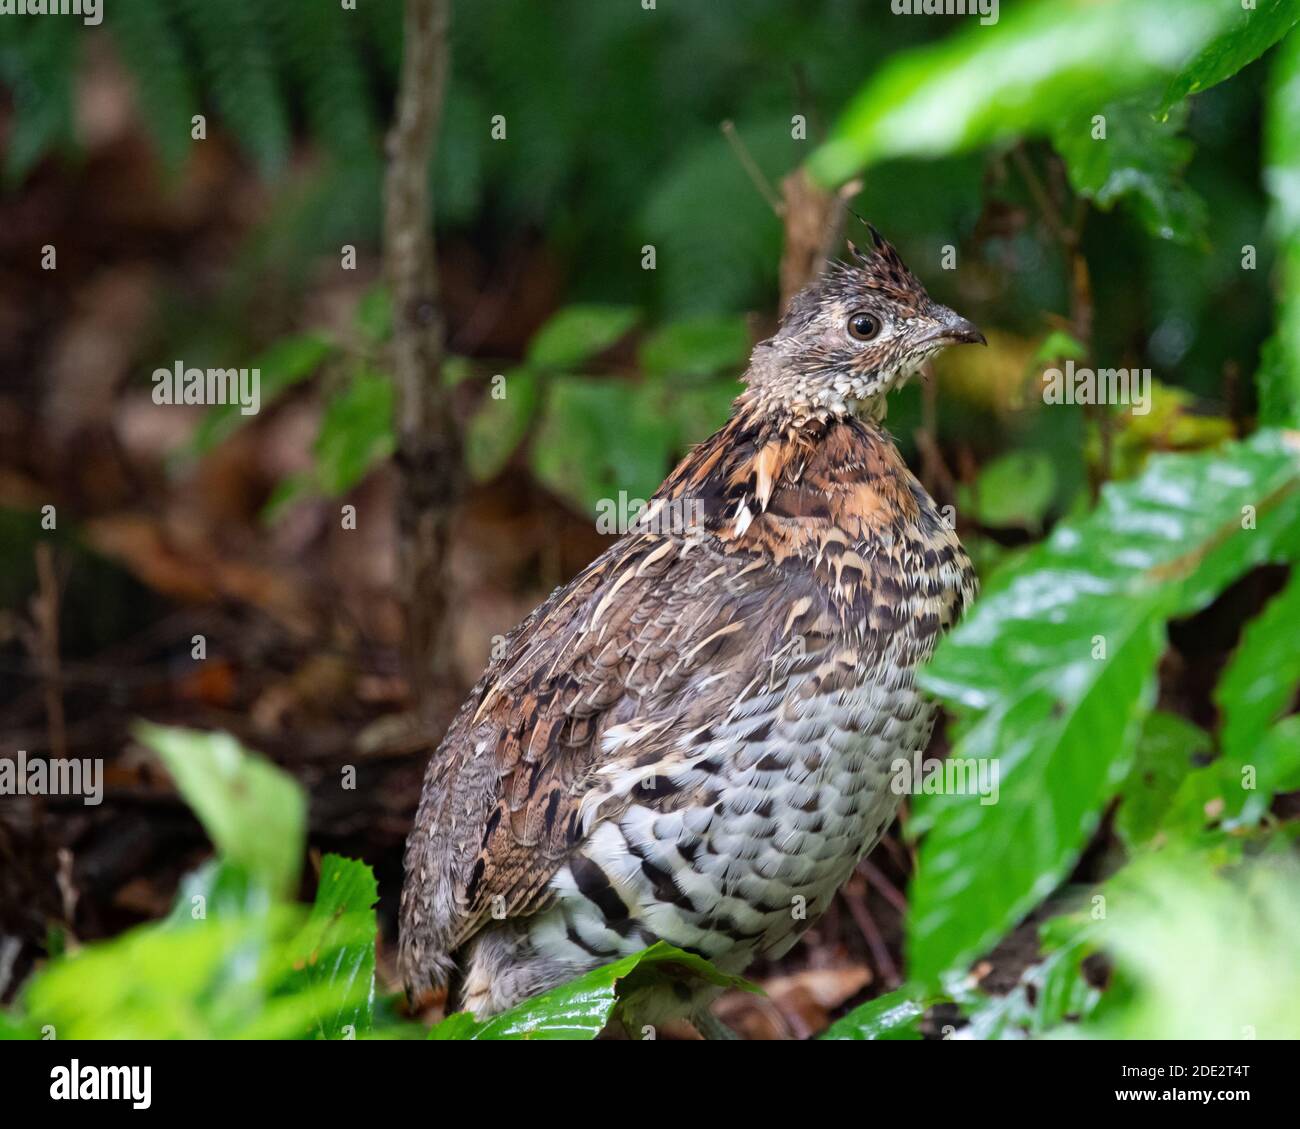 A soaking wet Ruffed Grouse, Bonasa umbellus, sitting under a tree in the rain in the Adirondack Mountains wilderness Stock Photo